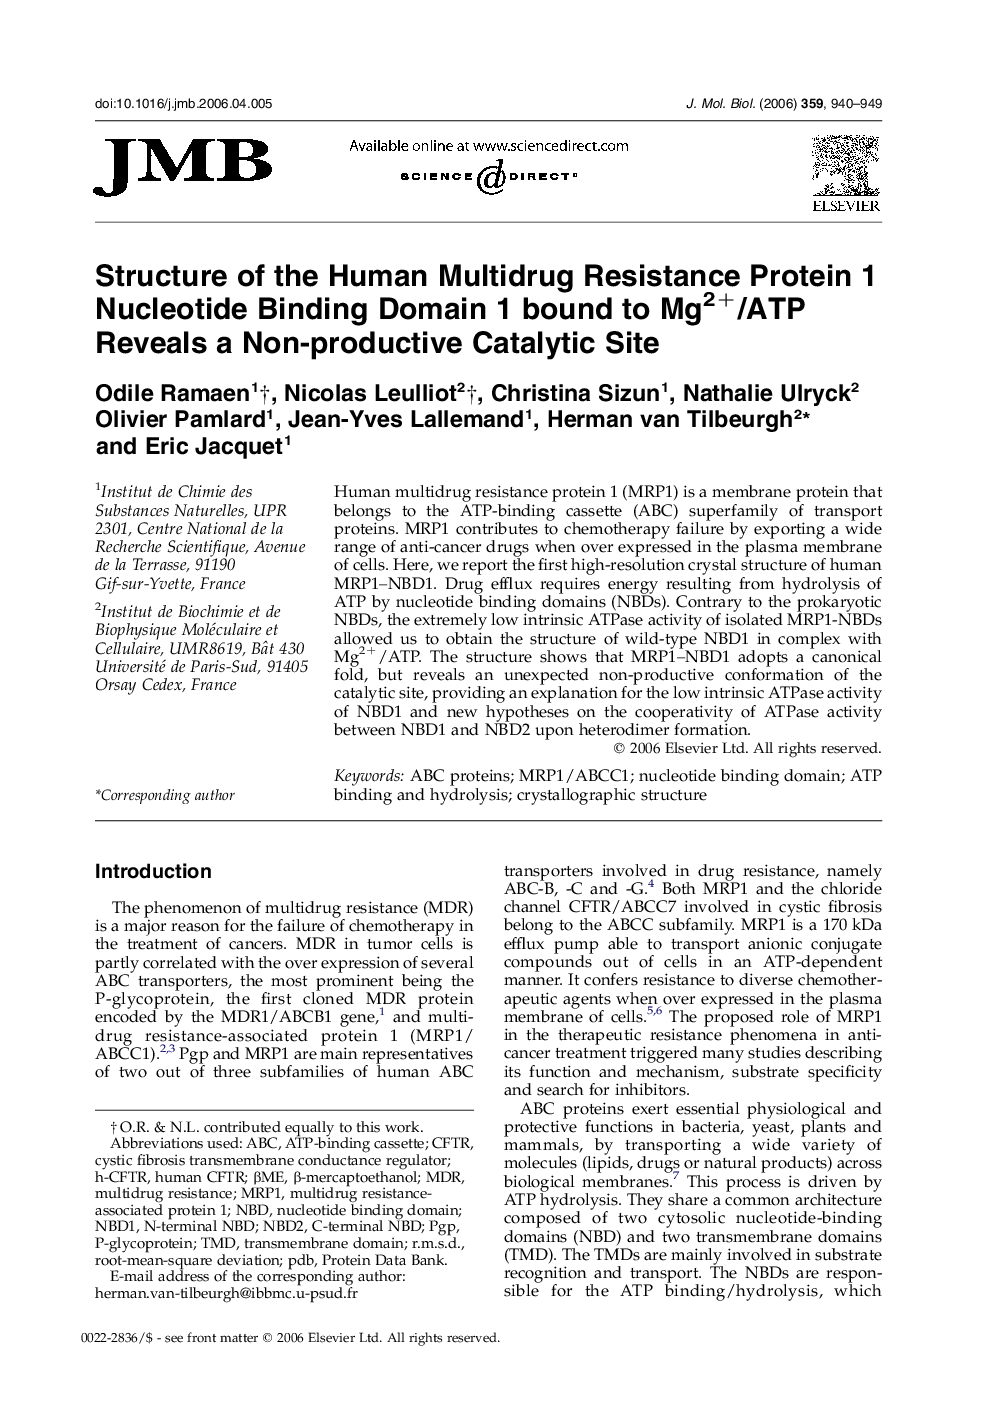 Structure of the Human Multidrug Resistance Protein 1 Nucleotide Binding Domain 1 bound to Mg2+/ATP Reveals a Non-productive Catalytic Site